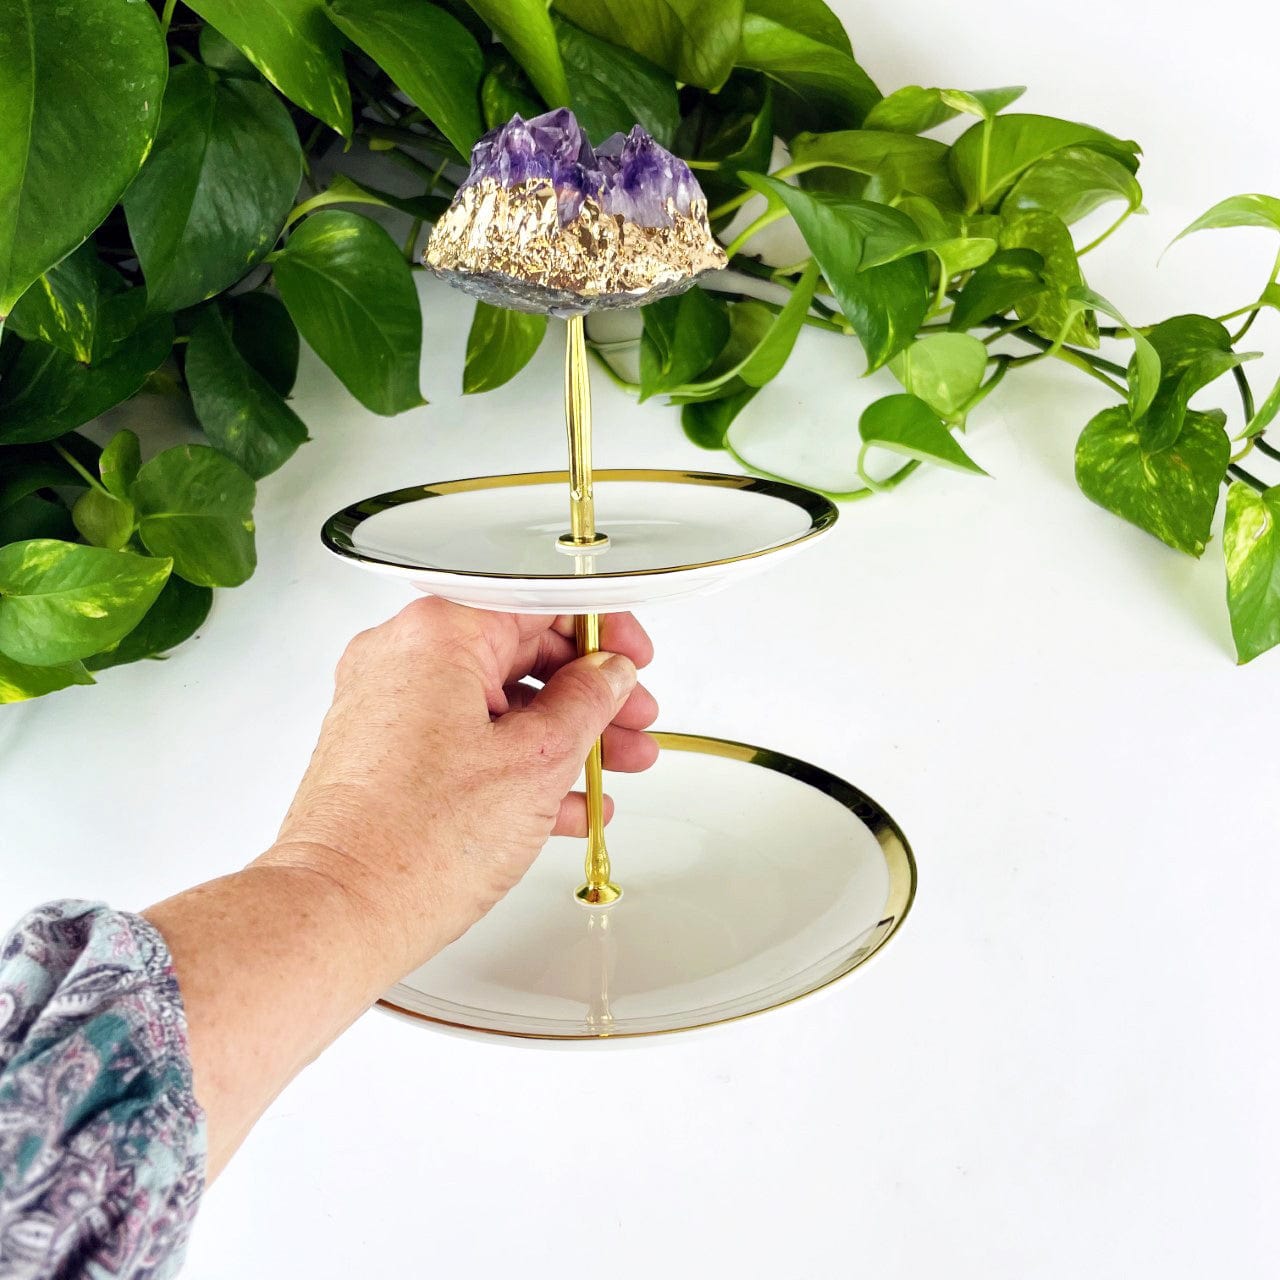 Amethyst Crystal Cluster with Gold Electroplated Edge Topper- 2 Tier Fruit Plate in hand